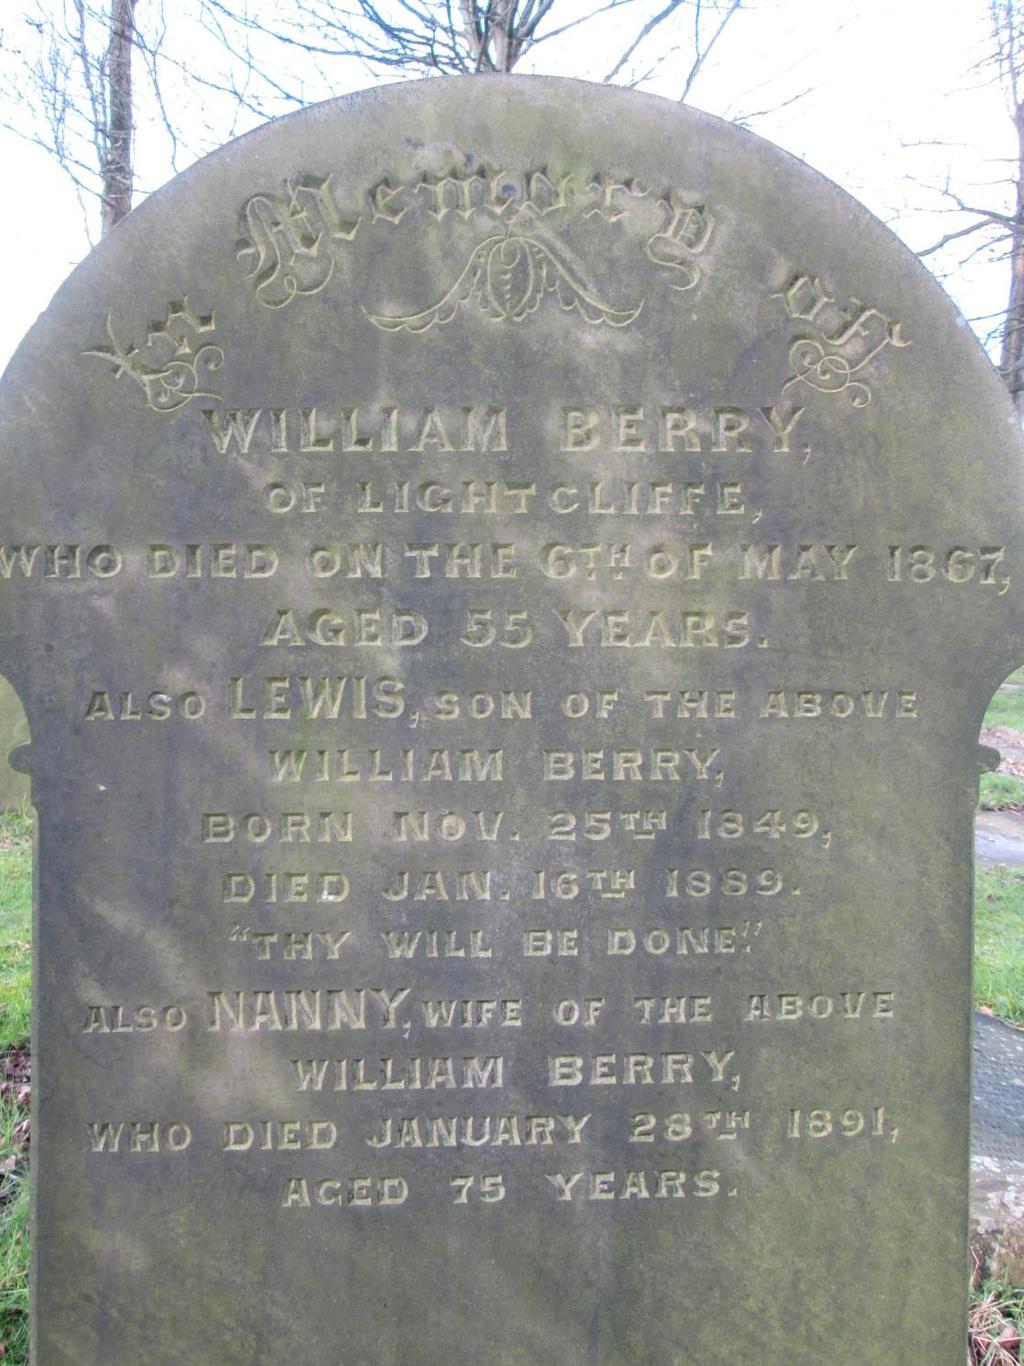 Lewis Berry died on 16 th January 1889 and was buried in an unknown grave within the middle churchyard at St Matthew s on 19 th January 1889; he was just 39 years old.